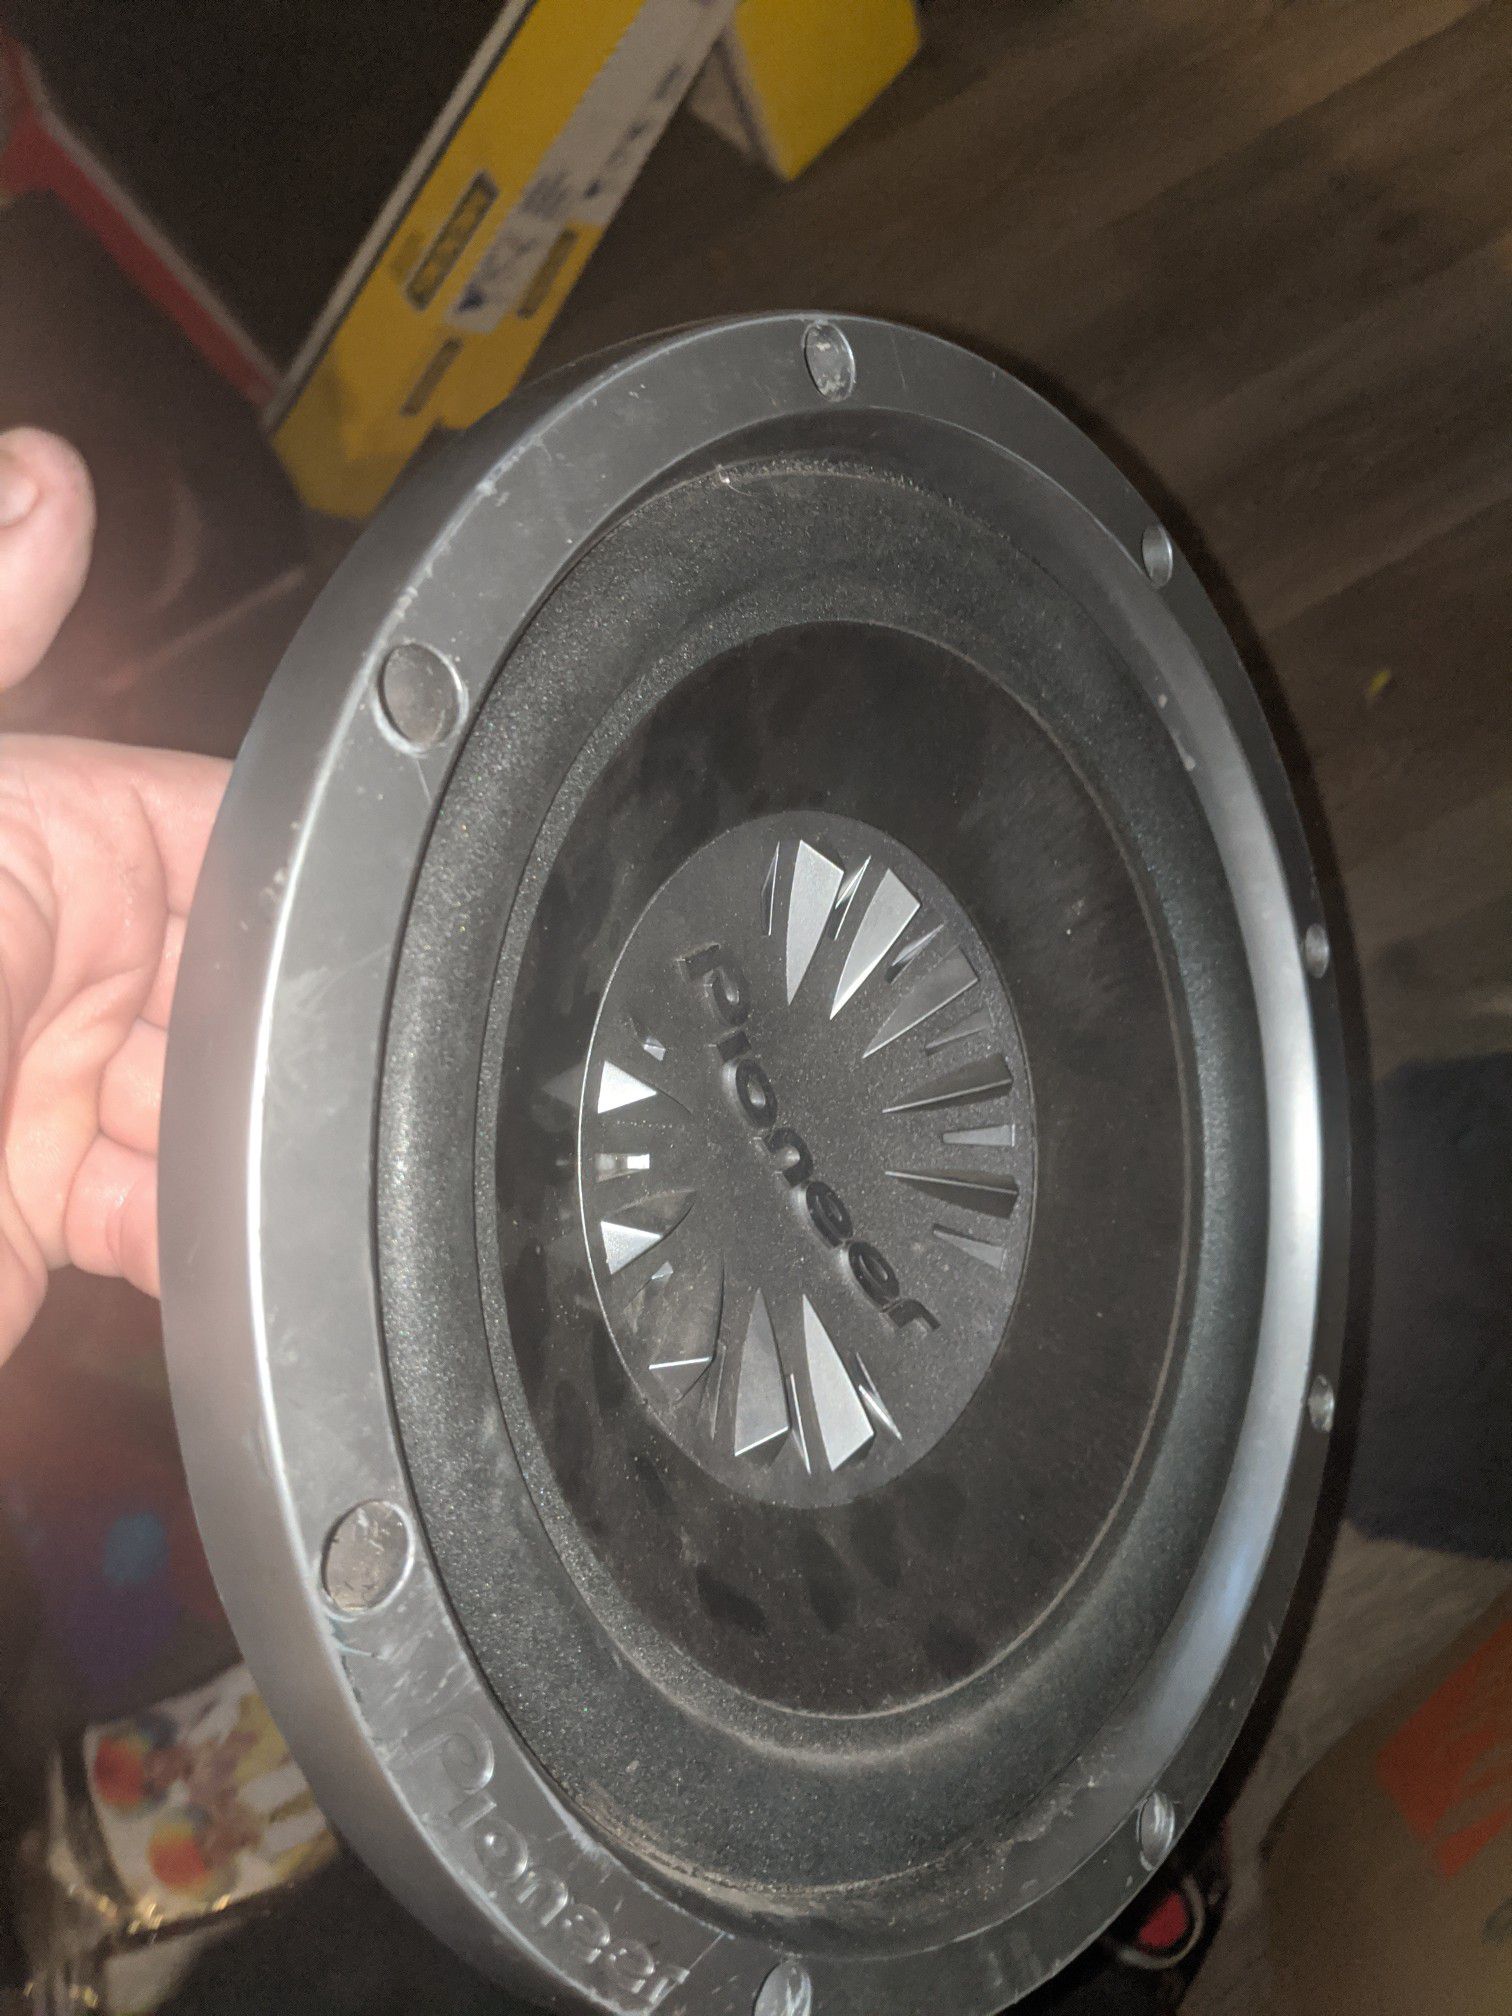 12 inch pioneer subwoofer voice coil stopped working out of nowhere! FREE